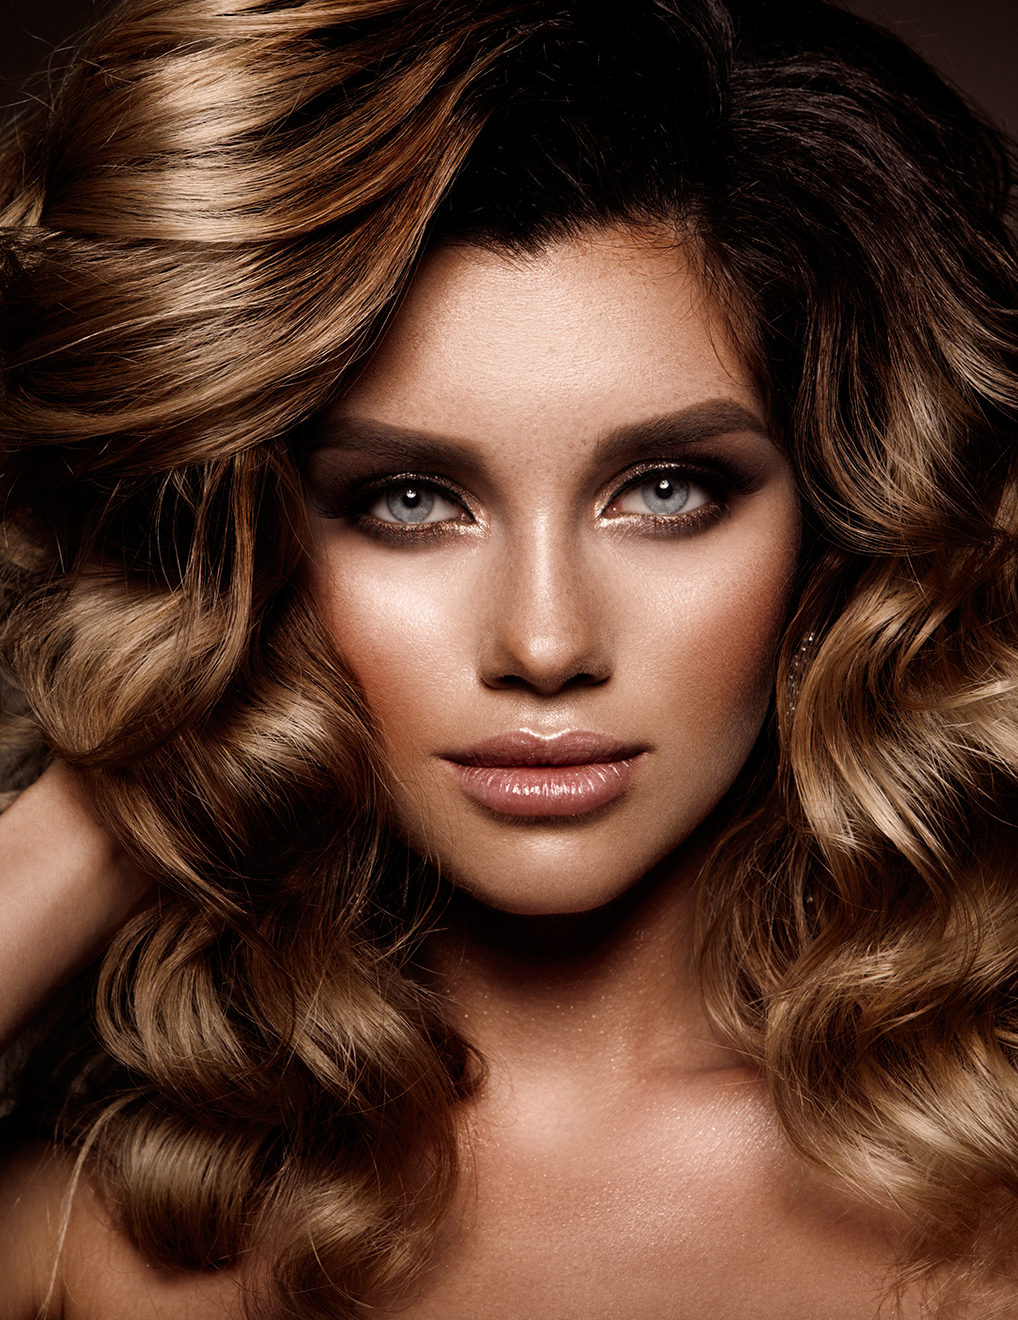 Heavenly Hair Become a Hair Extension Stockist or Franchisee